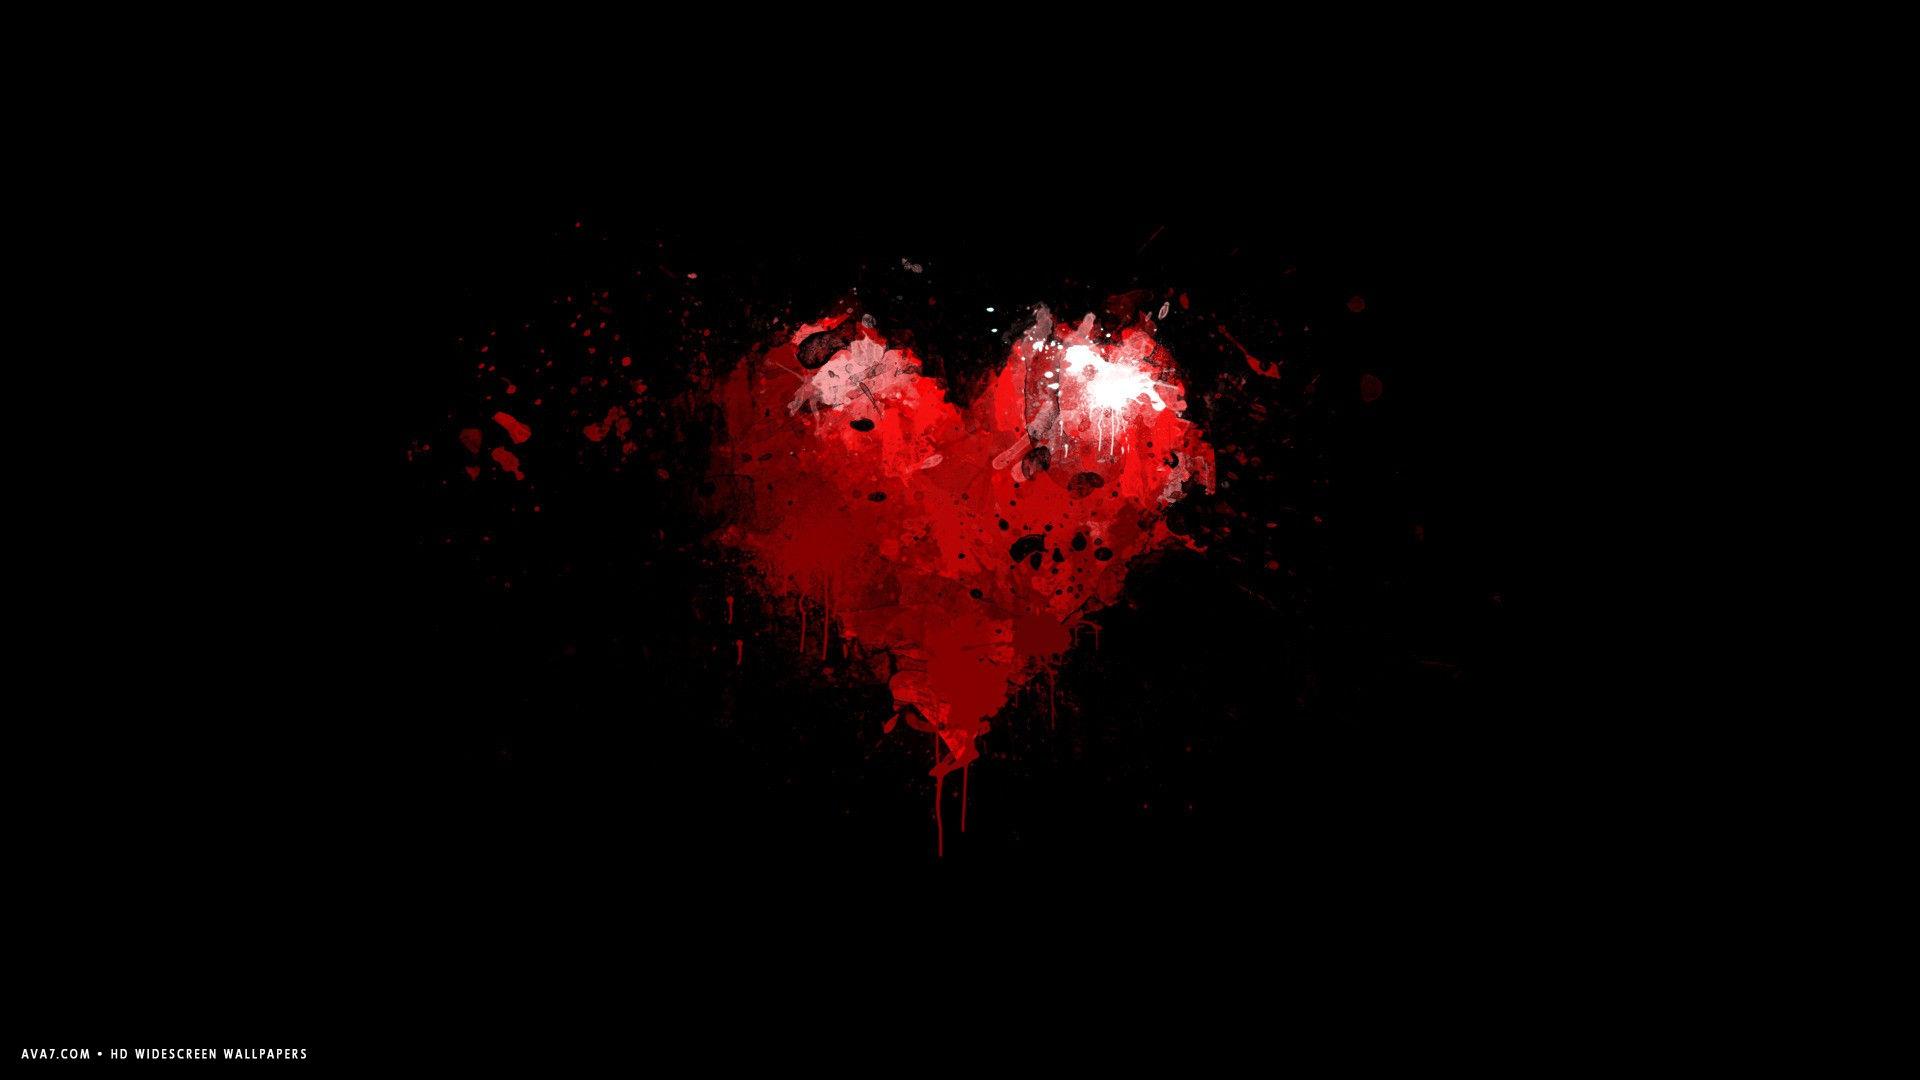 heart minimalistic red artistic symbol red grunge paint HD widescreen wallpaper / romantic background